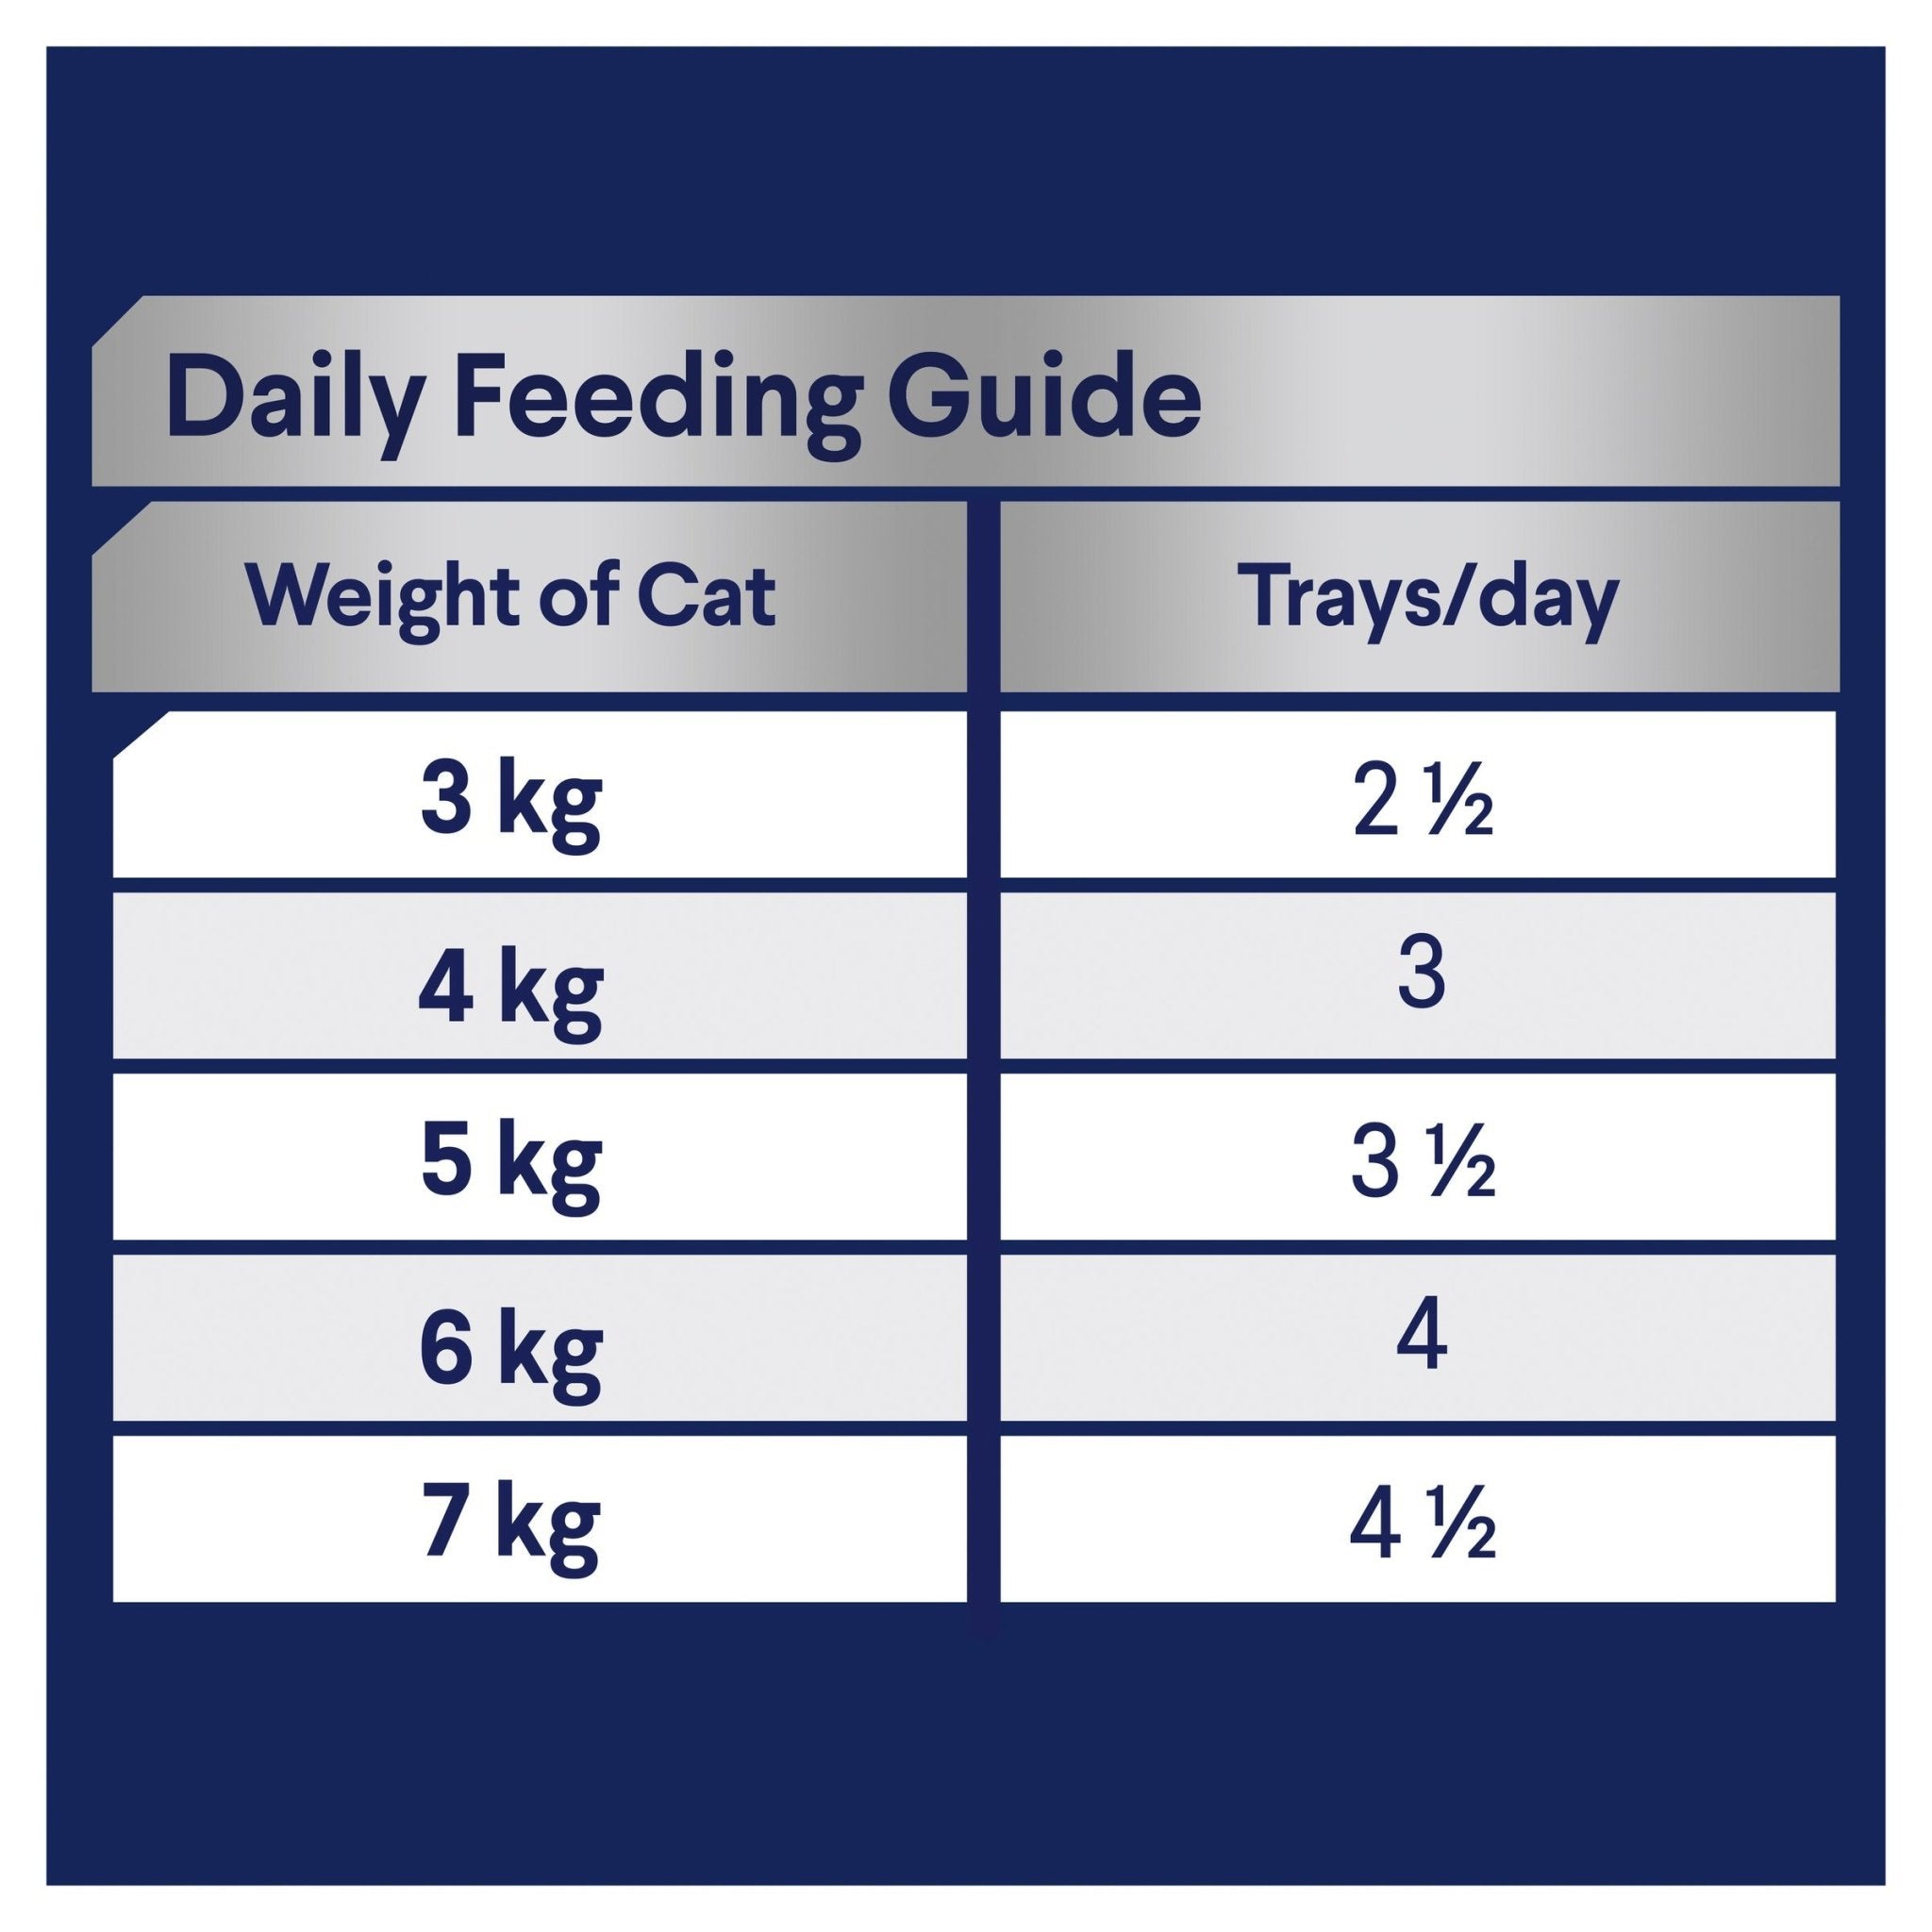 ADVANCE Adult Wet Cat Food with Succulent Turkey 7x85g Trays